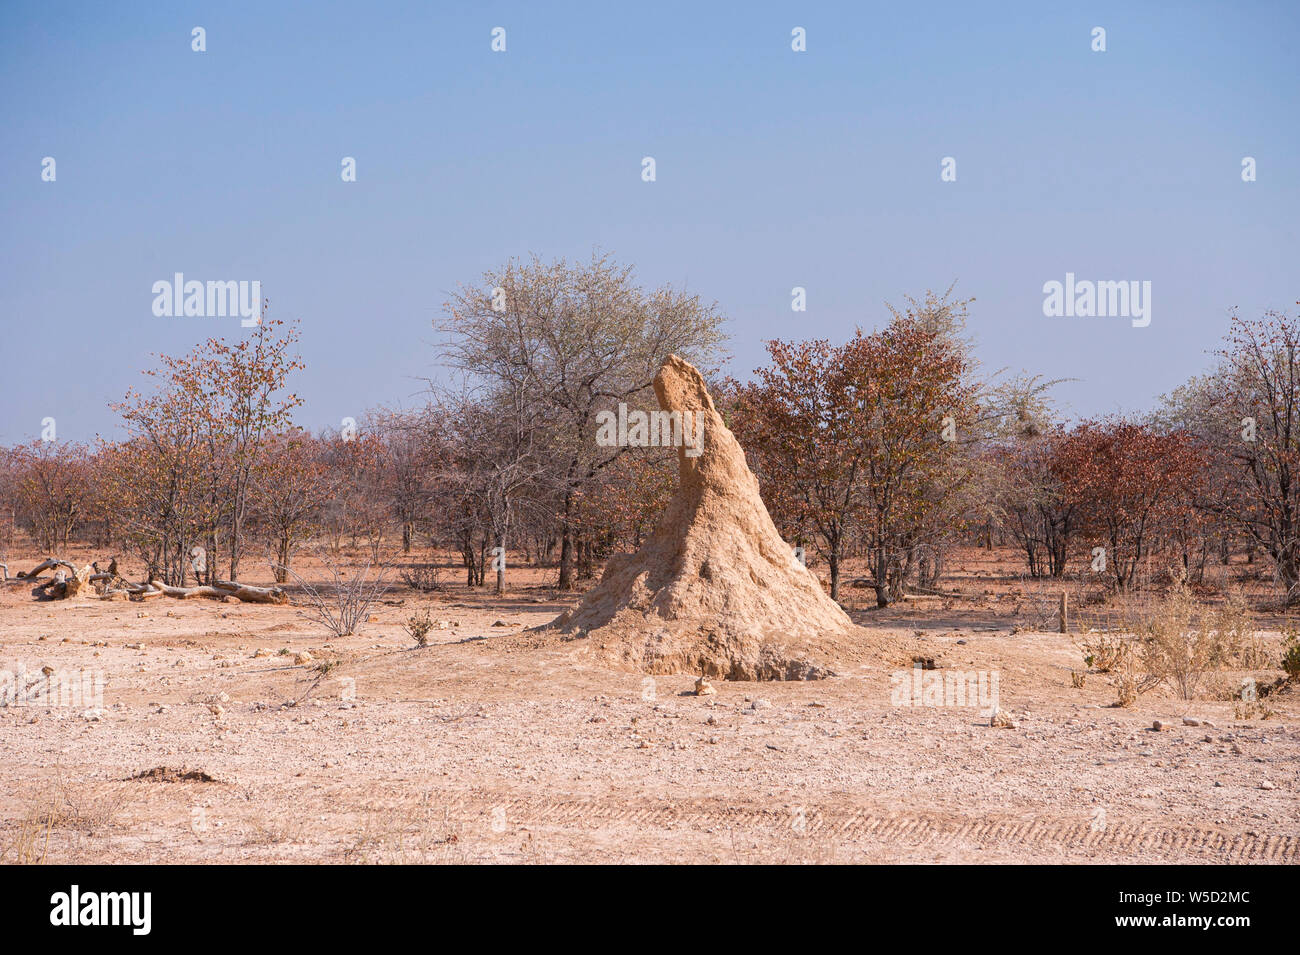 Termite mound. Termites are eusocial colonial insects mostly found in the tropics. The mounds they build are a combination of mud and chewed wood and Stock Photo